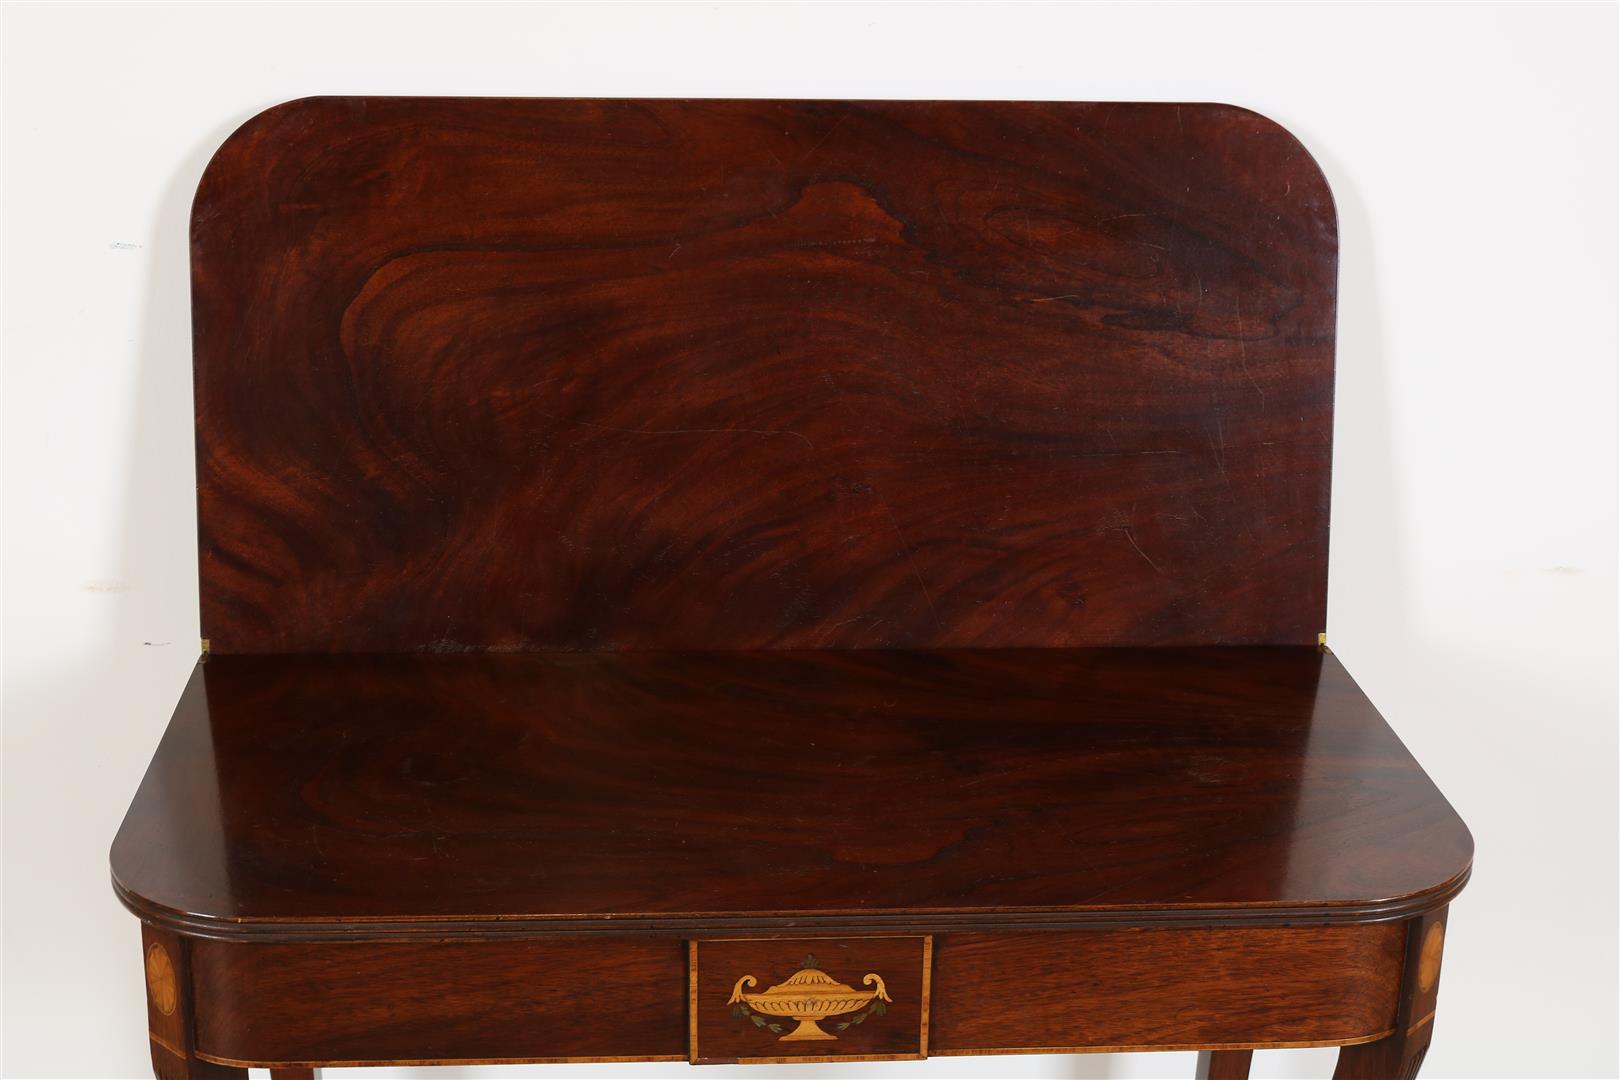 Mahogany Georgian-style coffee/breakfast table with folding top, inlaid vase in skirting boards - Image 3 of 6